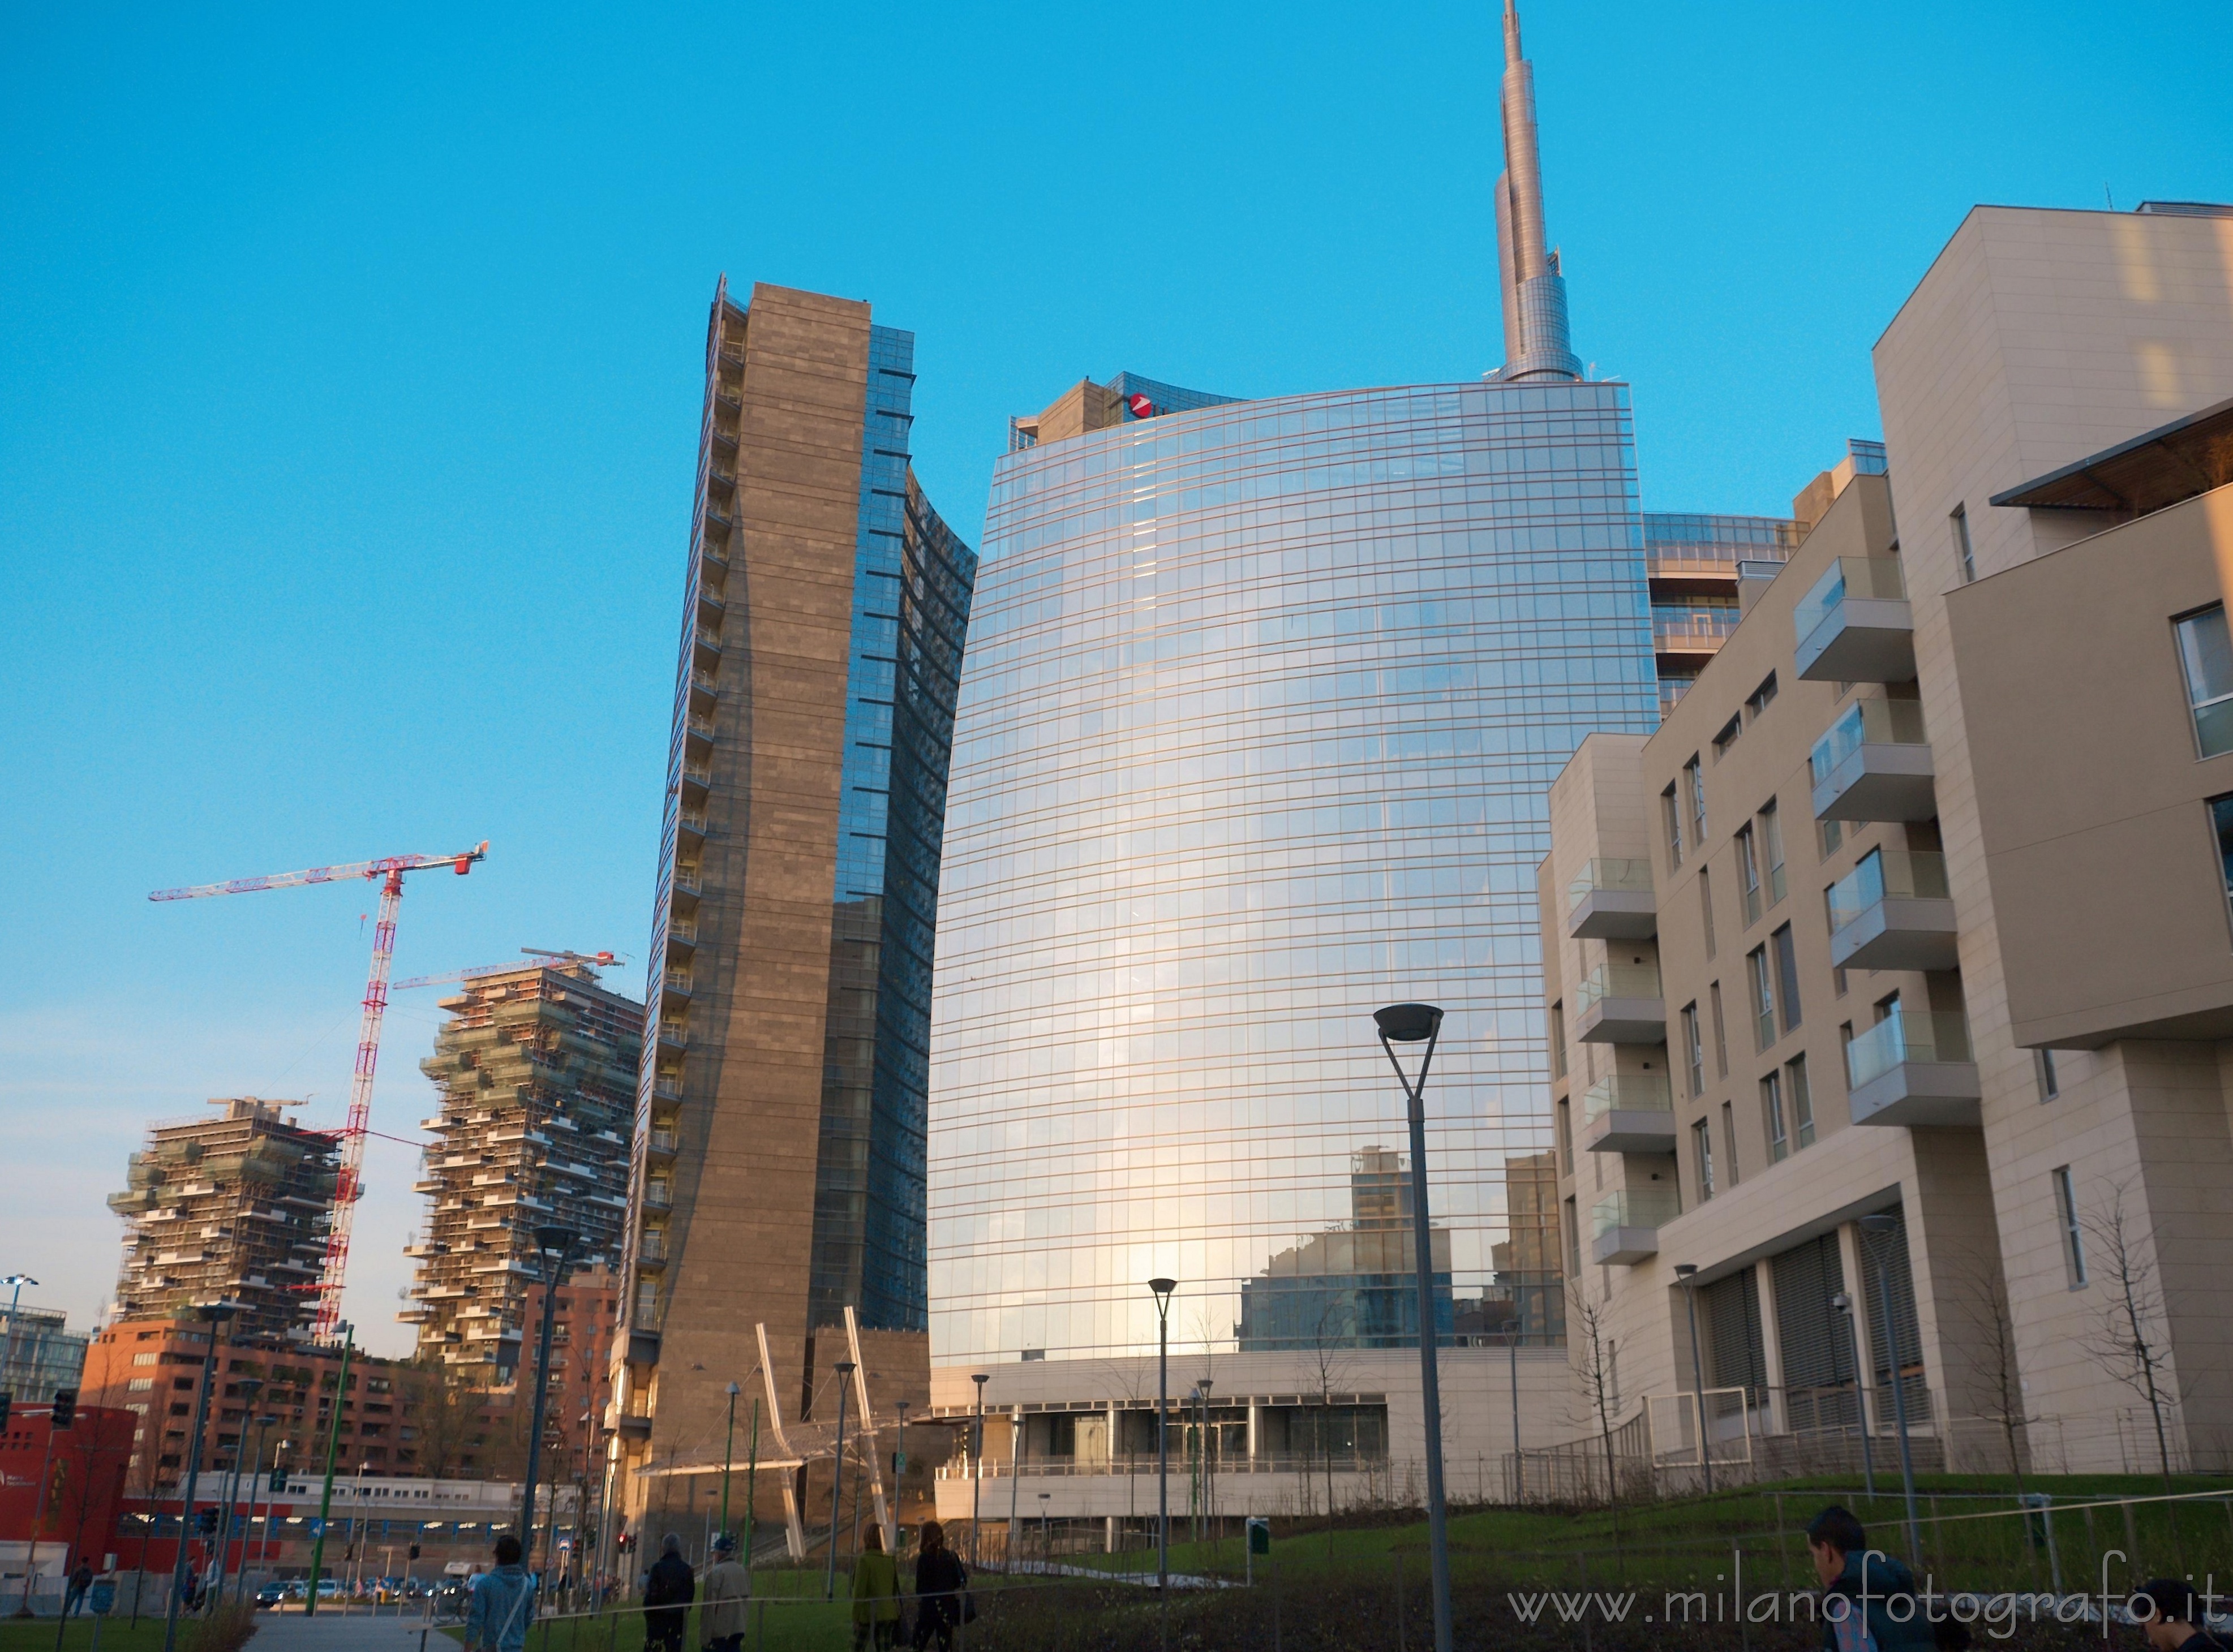 Milan (Italy): Unicredit Tower and new skyscrapers in Porta Nuova - Milan (Italy)